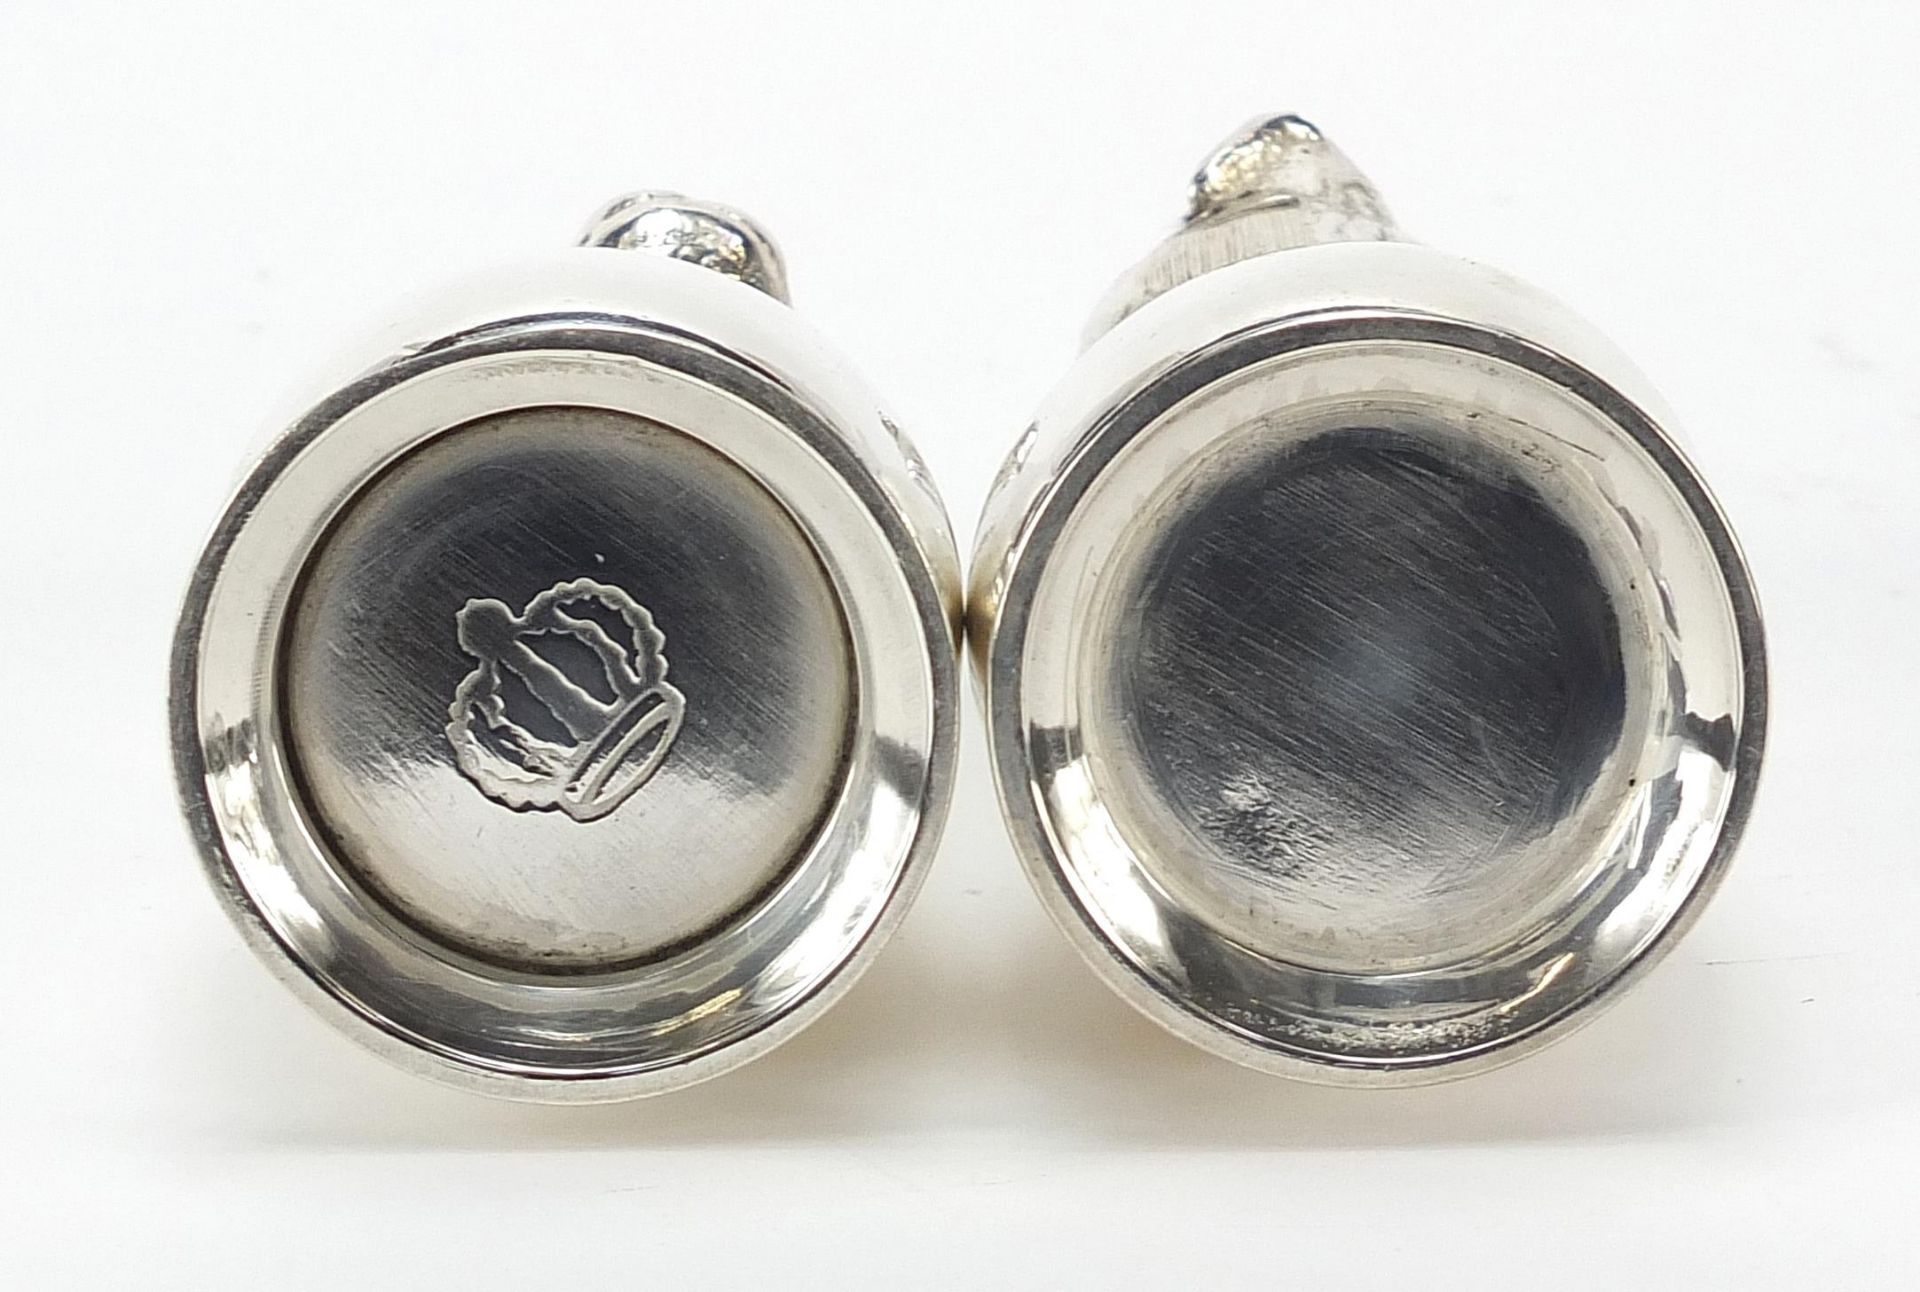 Pair of novelty silver plated casters in the form of a cat and dog, 11cm high - Image 3 of 4